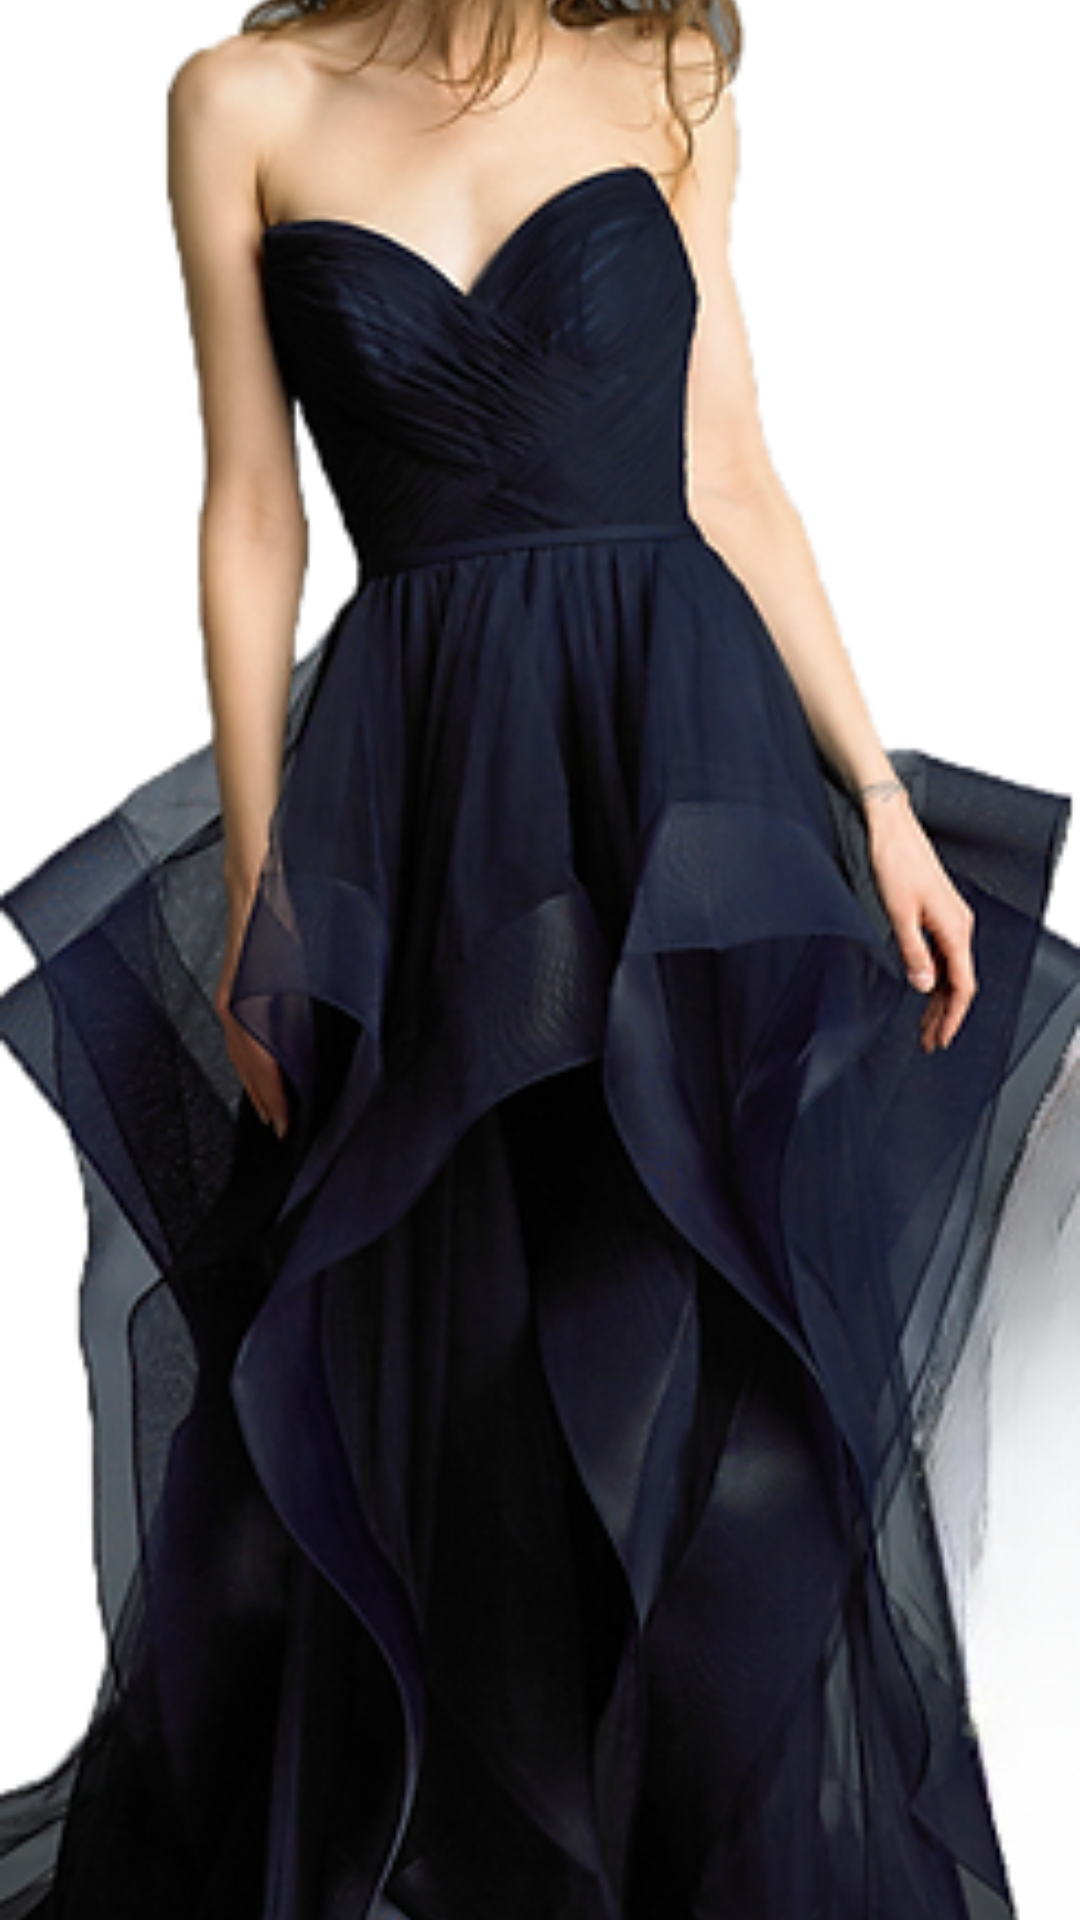 Basix Black Label Callie Bustier Waterfall Gown in Navy